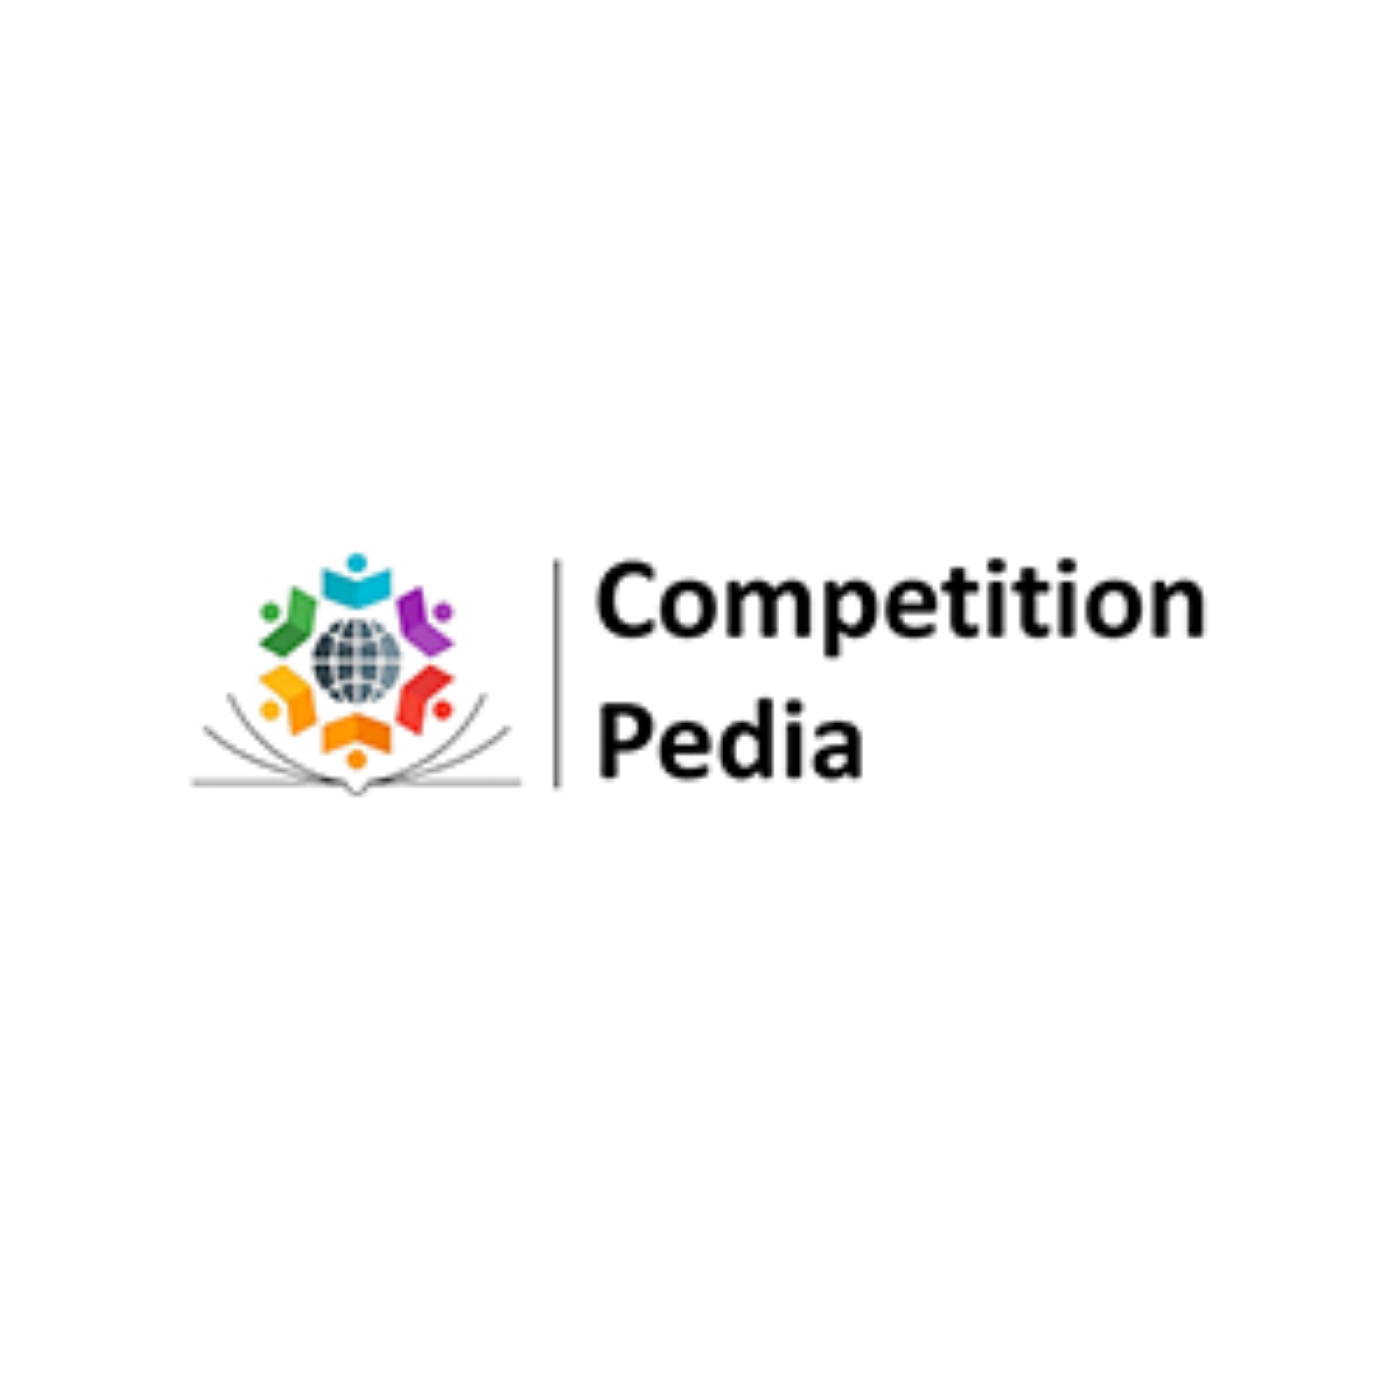 CompetitionPedia|Colleges|Education